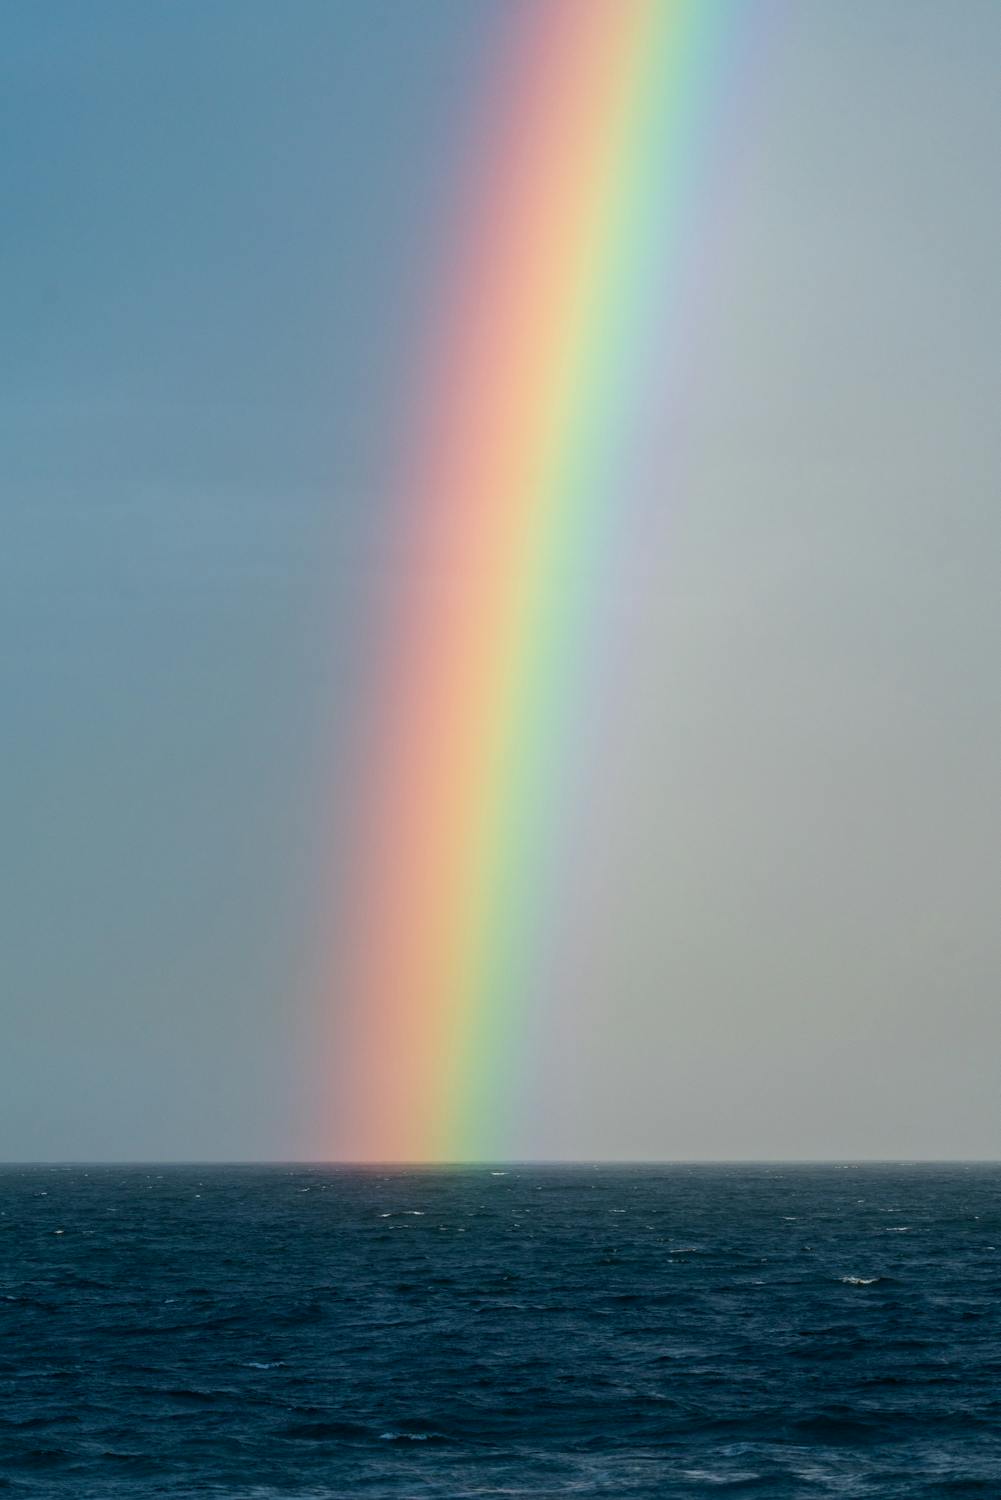 Sky with rainbow over rippling blue ocean · Free Stock Photo